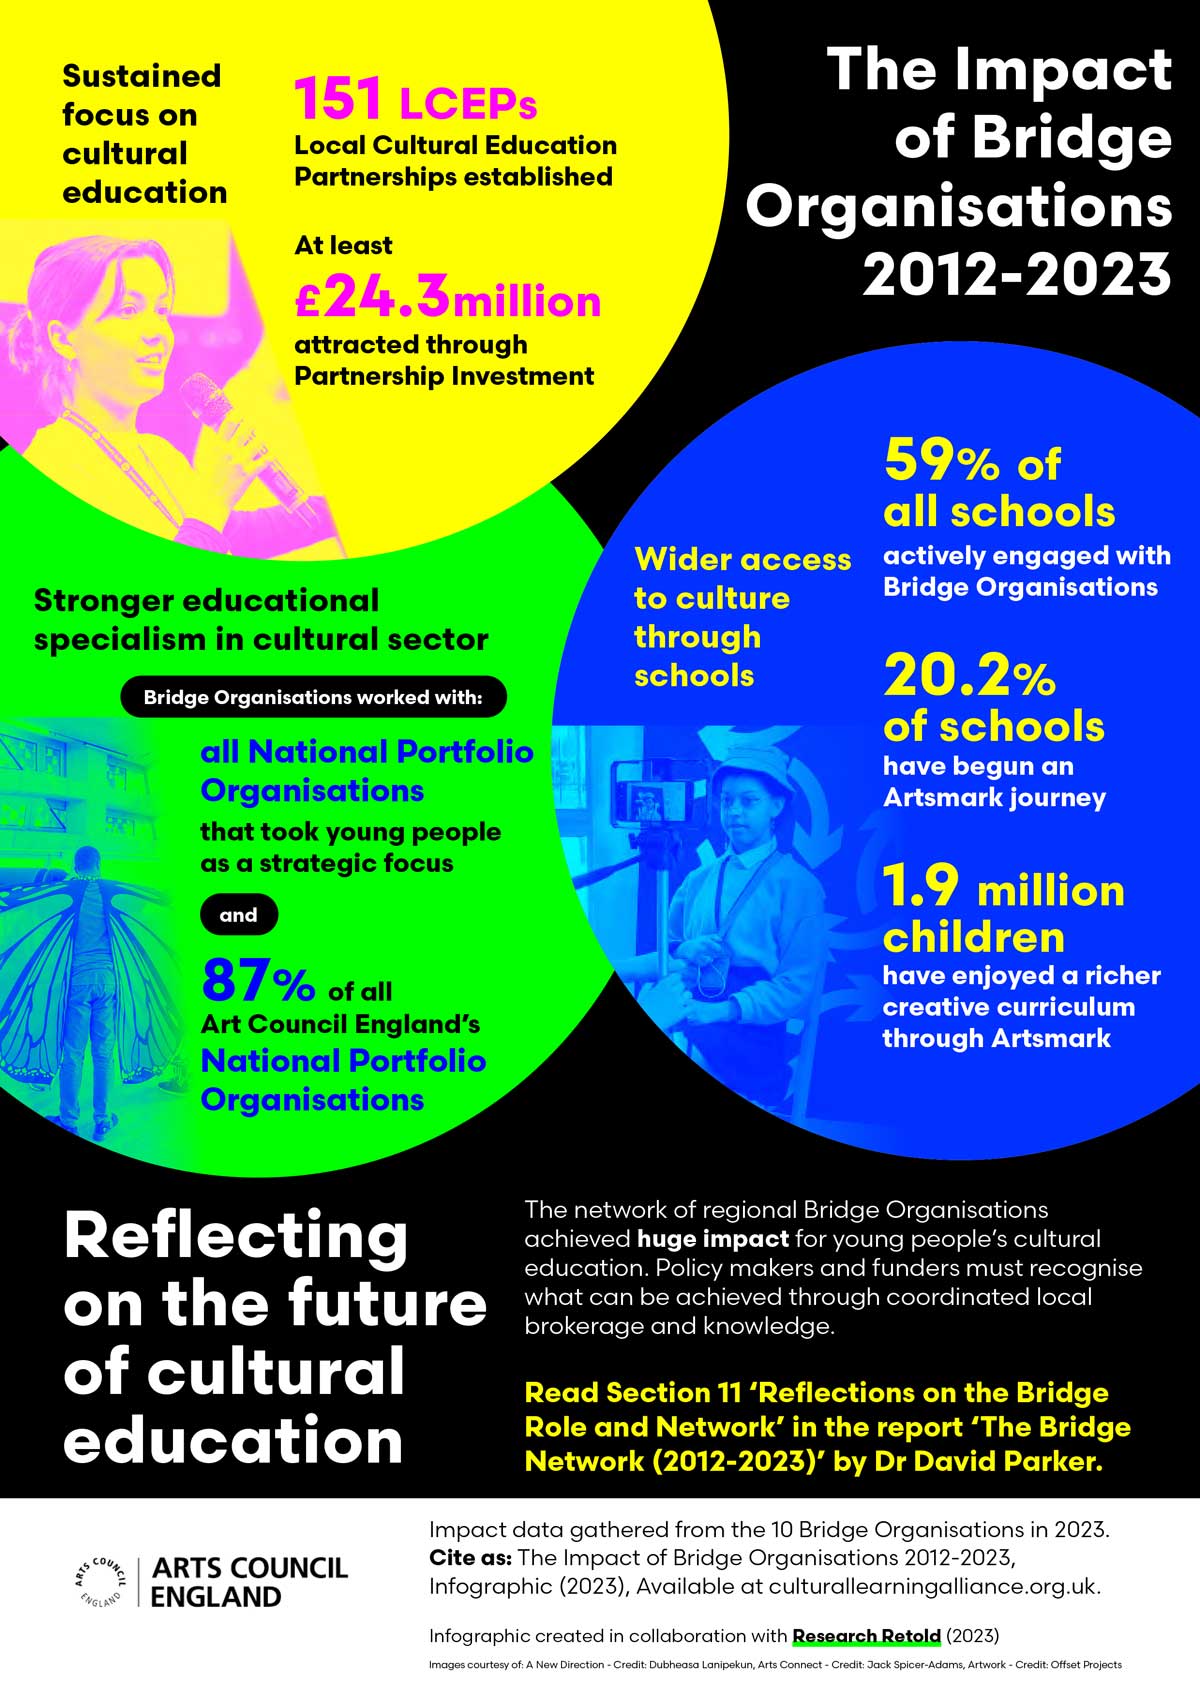 Infographic summarising the impact of the Bridge Network between 2012 snd 2023. Key stats: 151 LCEPs established, more than £24.3 million attracted through partnership investment. Working with 87% or all Arts Council NPOs and all of those with young people as a strategic focus. Actively engaged with 59% of schools nationwide and 1.9 million children have enjoyed a richer creative curriculum through engagement with Artsmark.